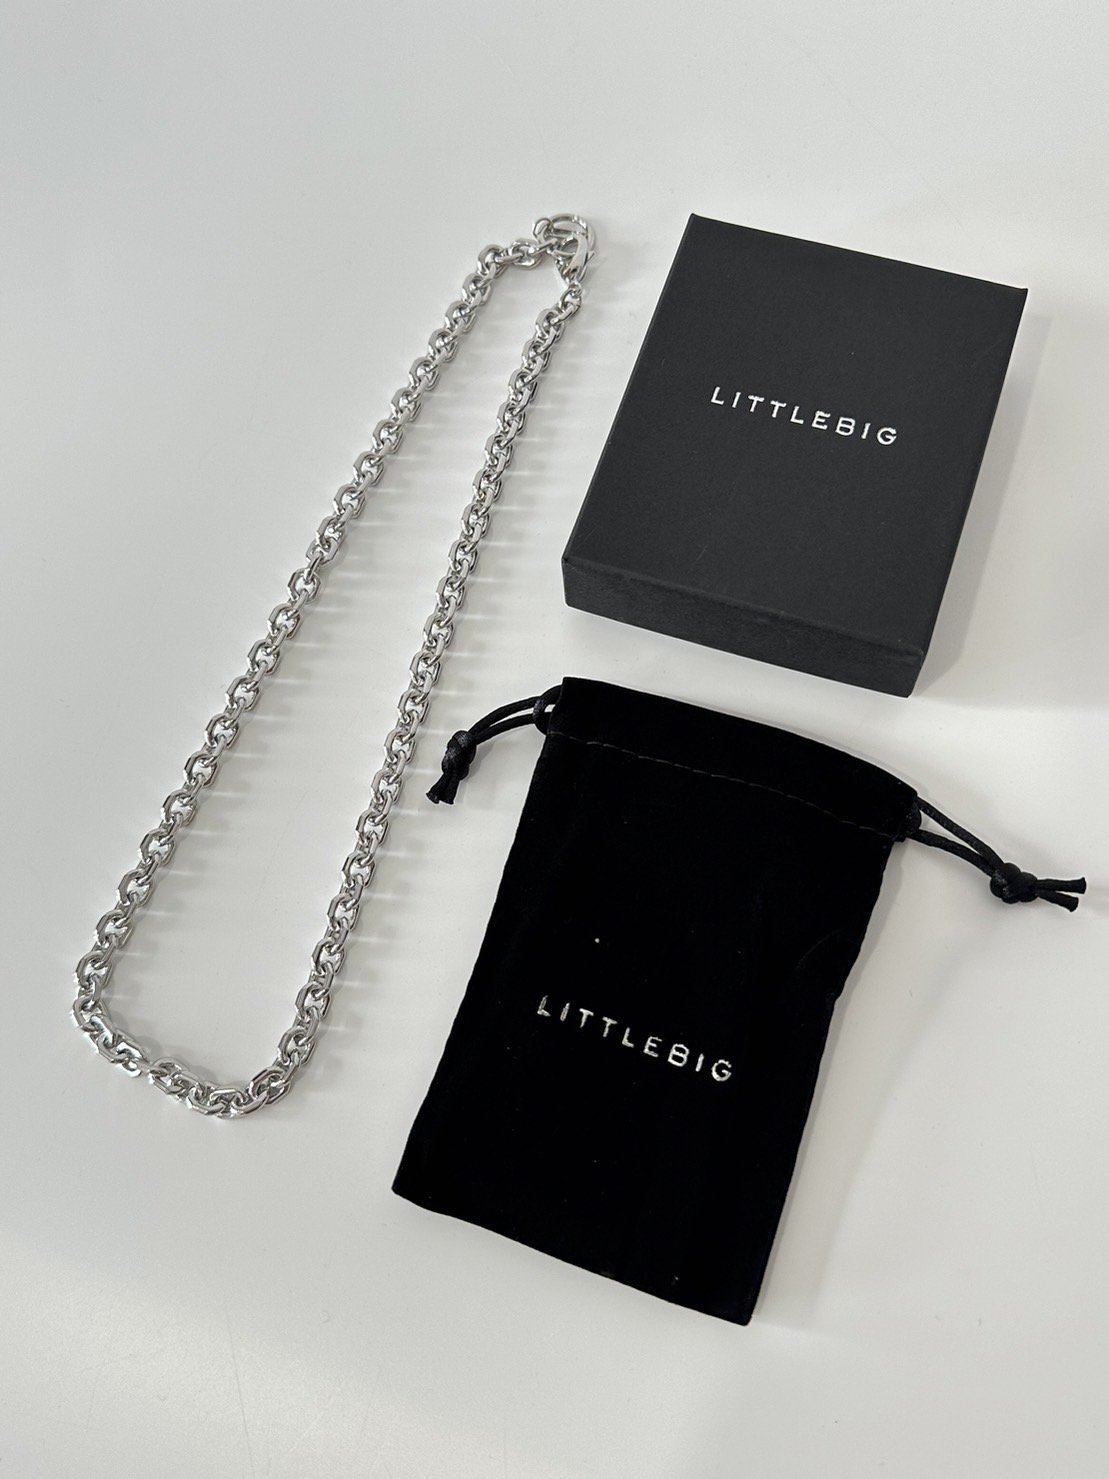 LITTLEBIG<br />Hexagon Necklace / Silver<img class='new_mark_img2' src='https://img.shop-pro.jp/img/new/icons14.gif' style='border:none;display:inline;margin:0px;padding:0px;width:auto;' />